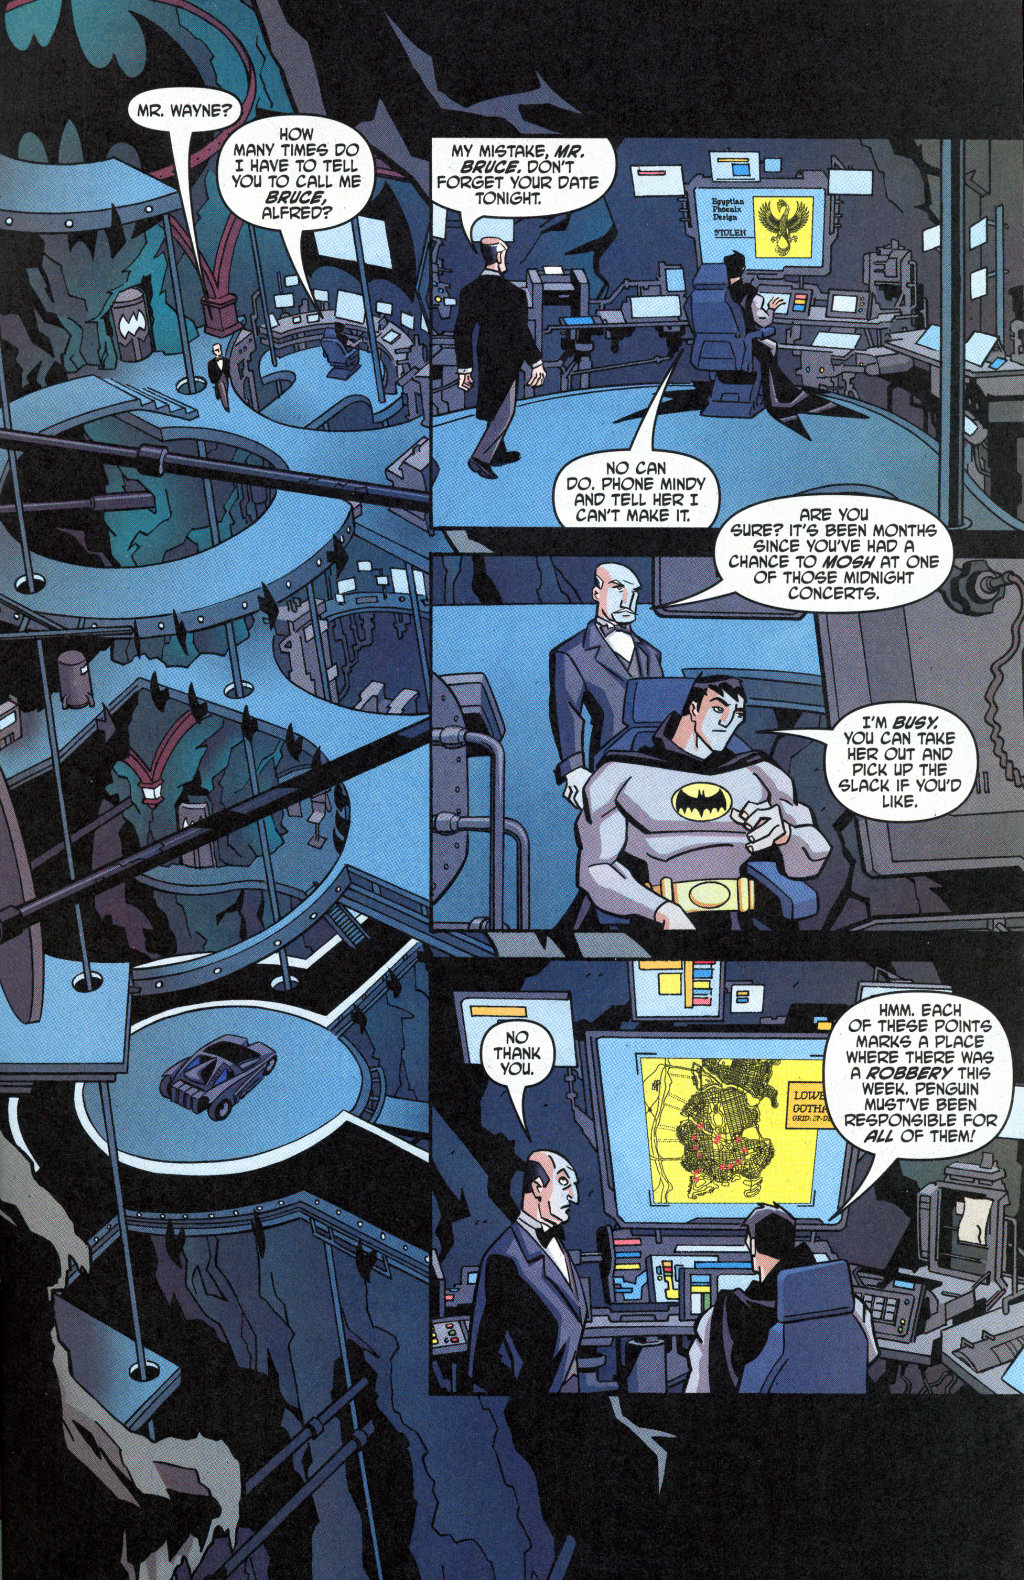 The Batman Strikes! issue 1 (Burger King Giveaway Edition) - Page 13